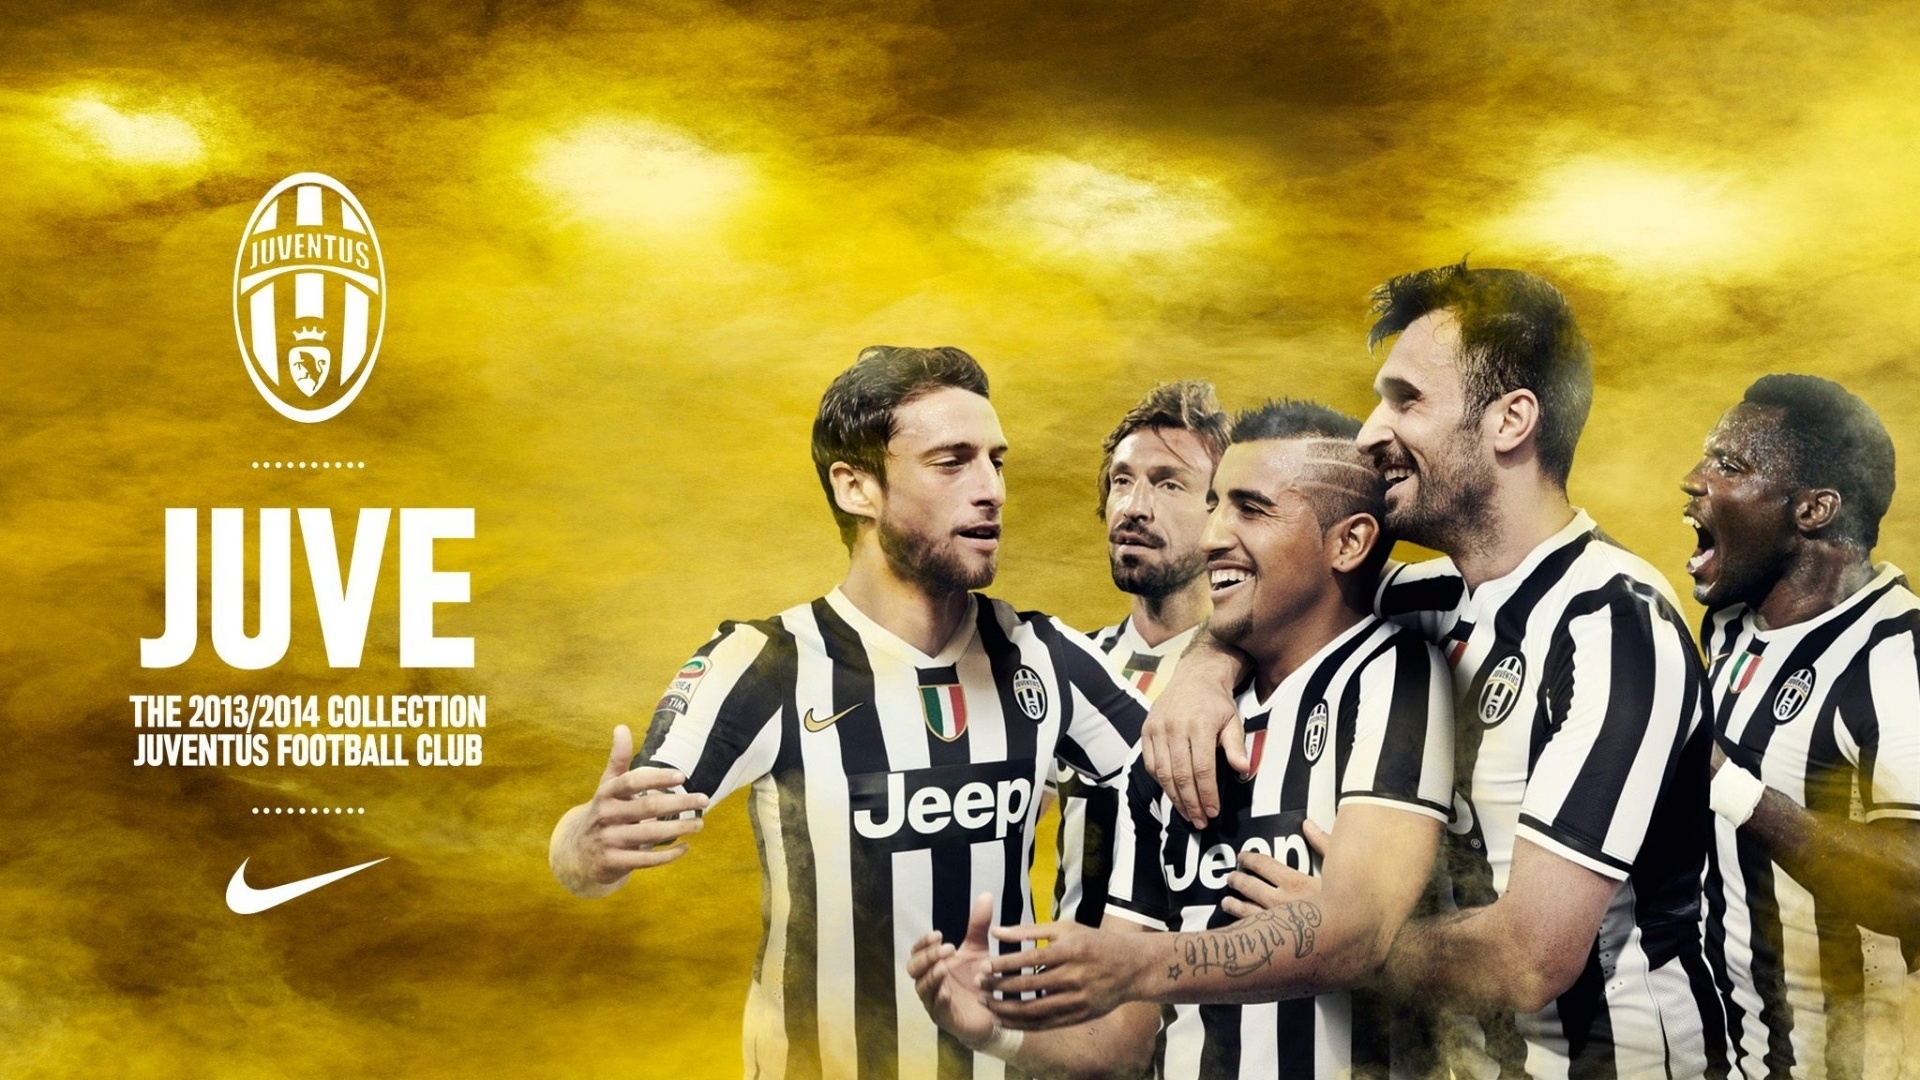 Juventus Happy Players for 1920 x 1080 HDTV 1080p resolution